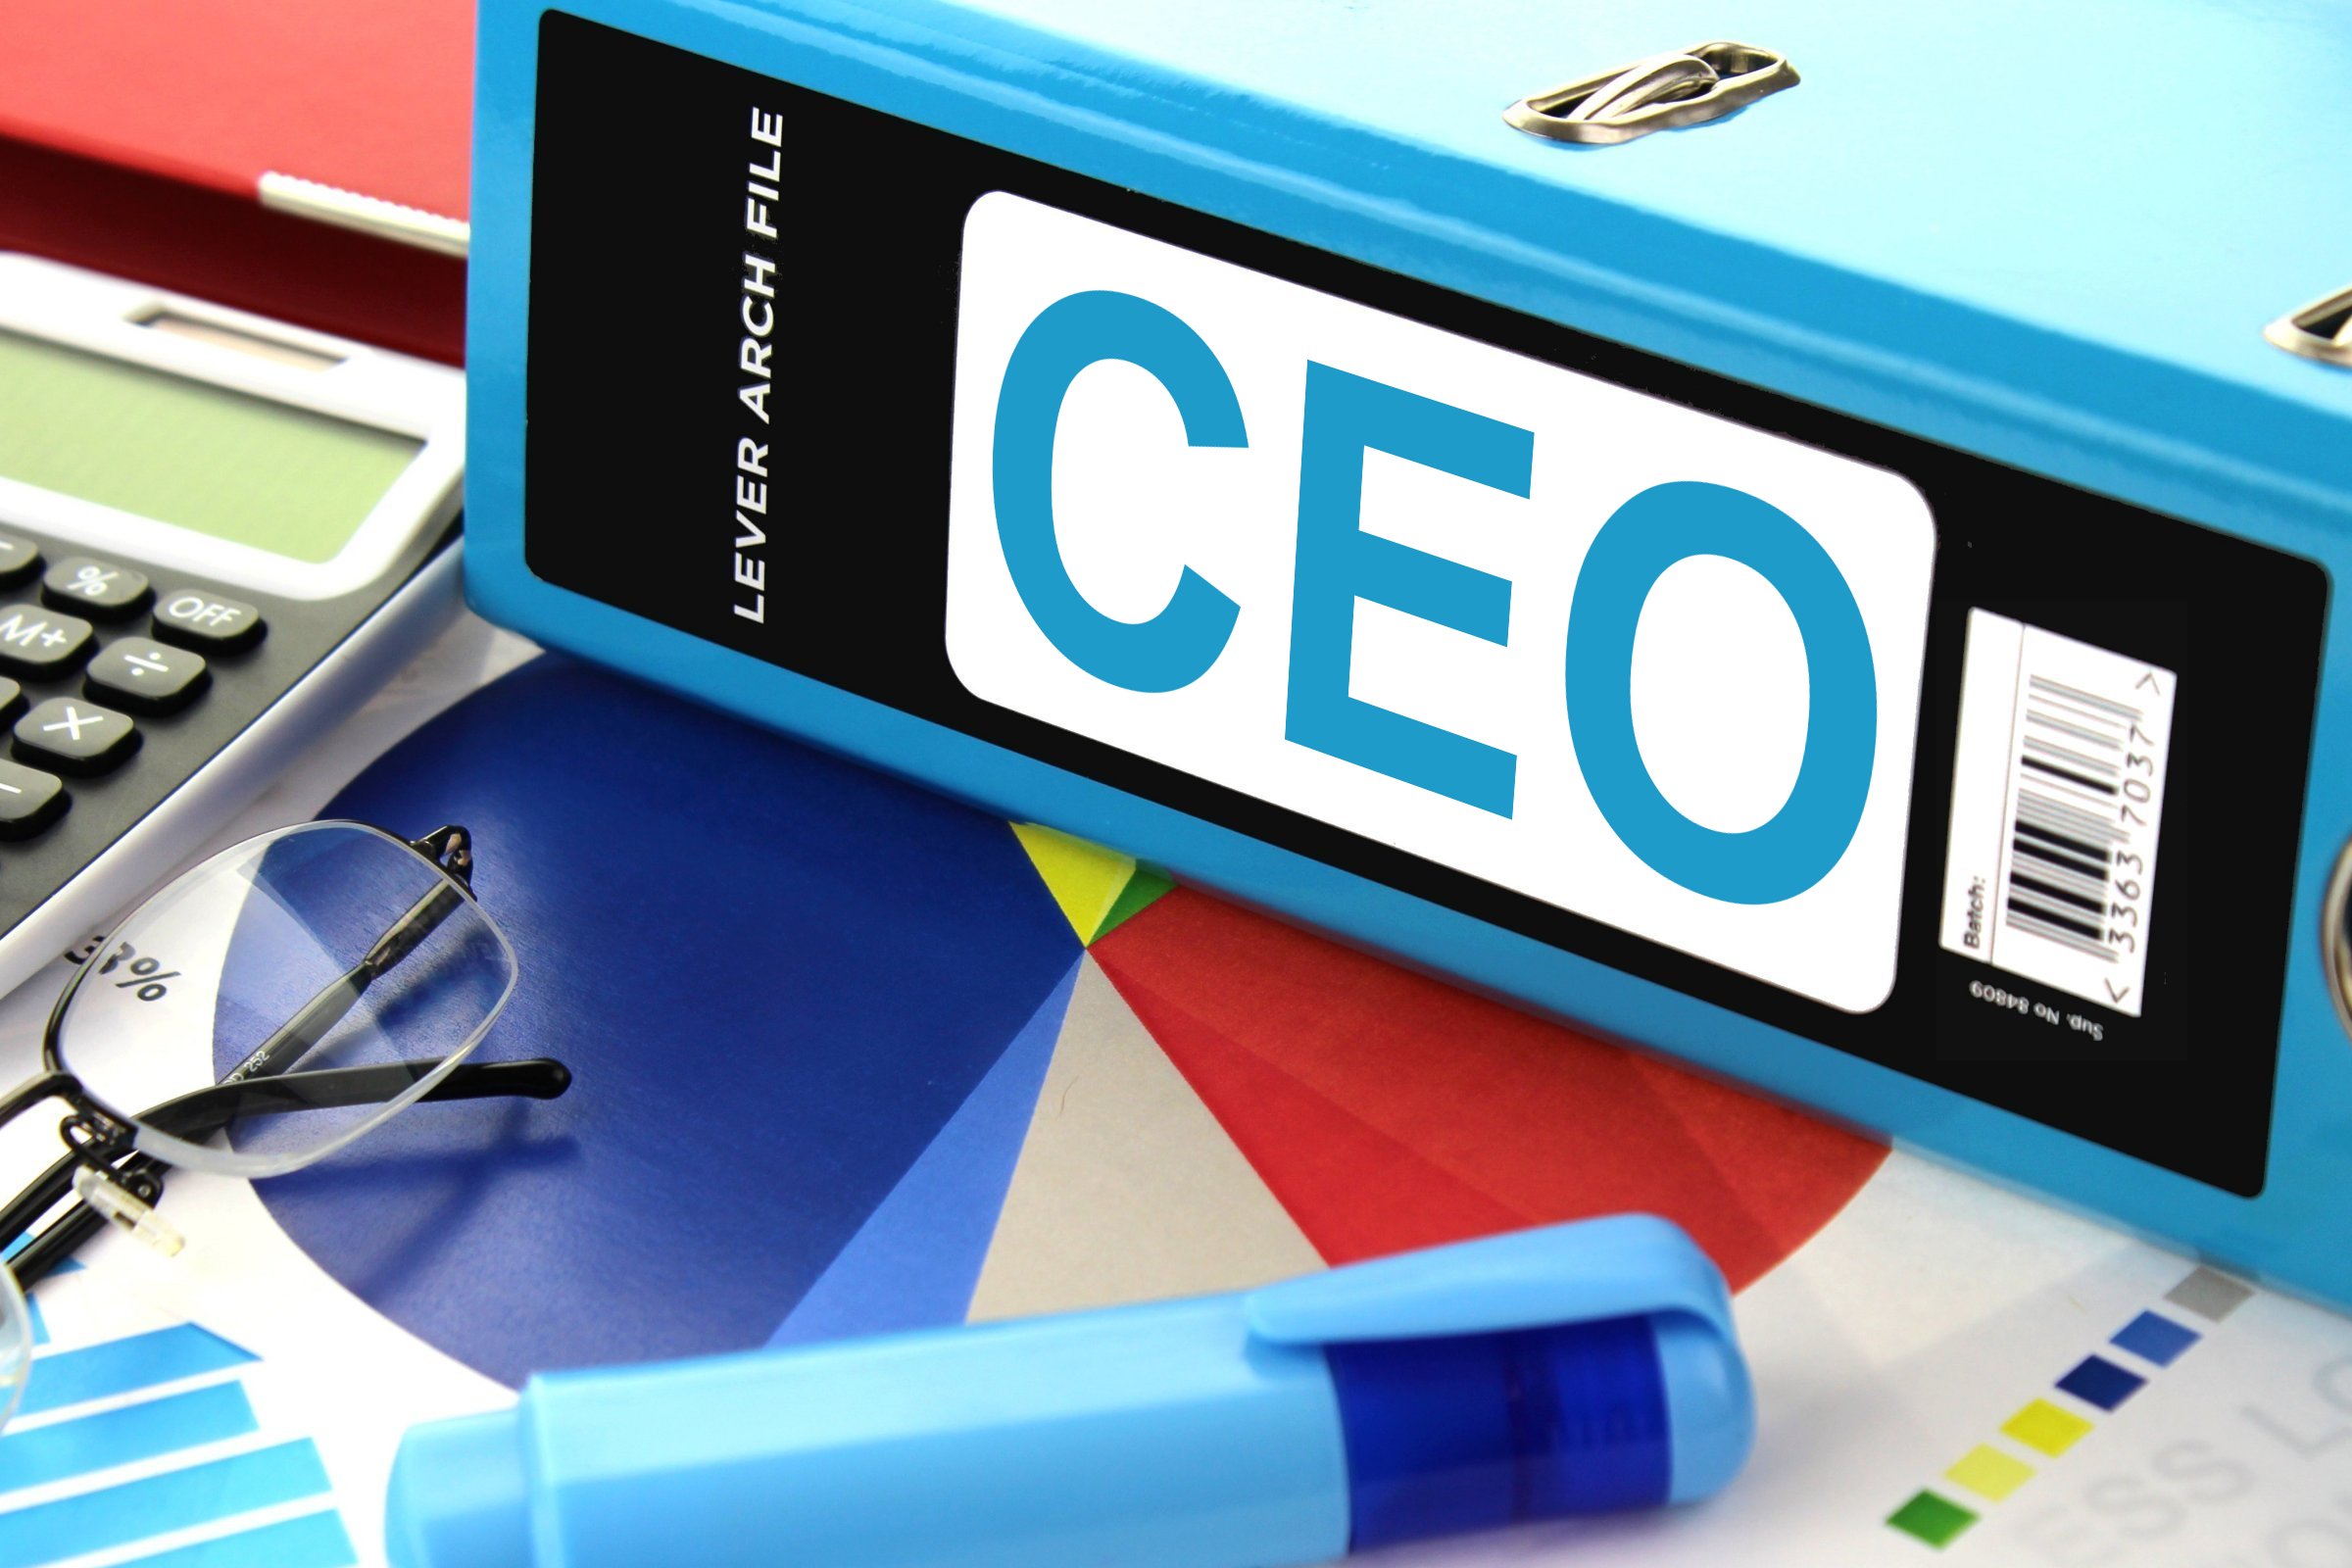 Ceo Free of Charge Creative Commons Lever arch file image